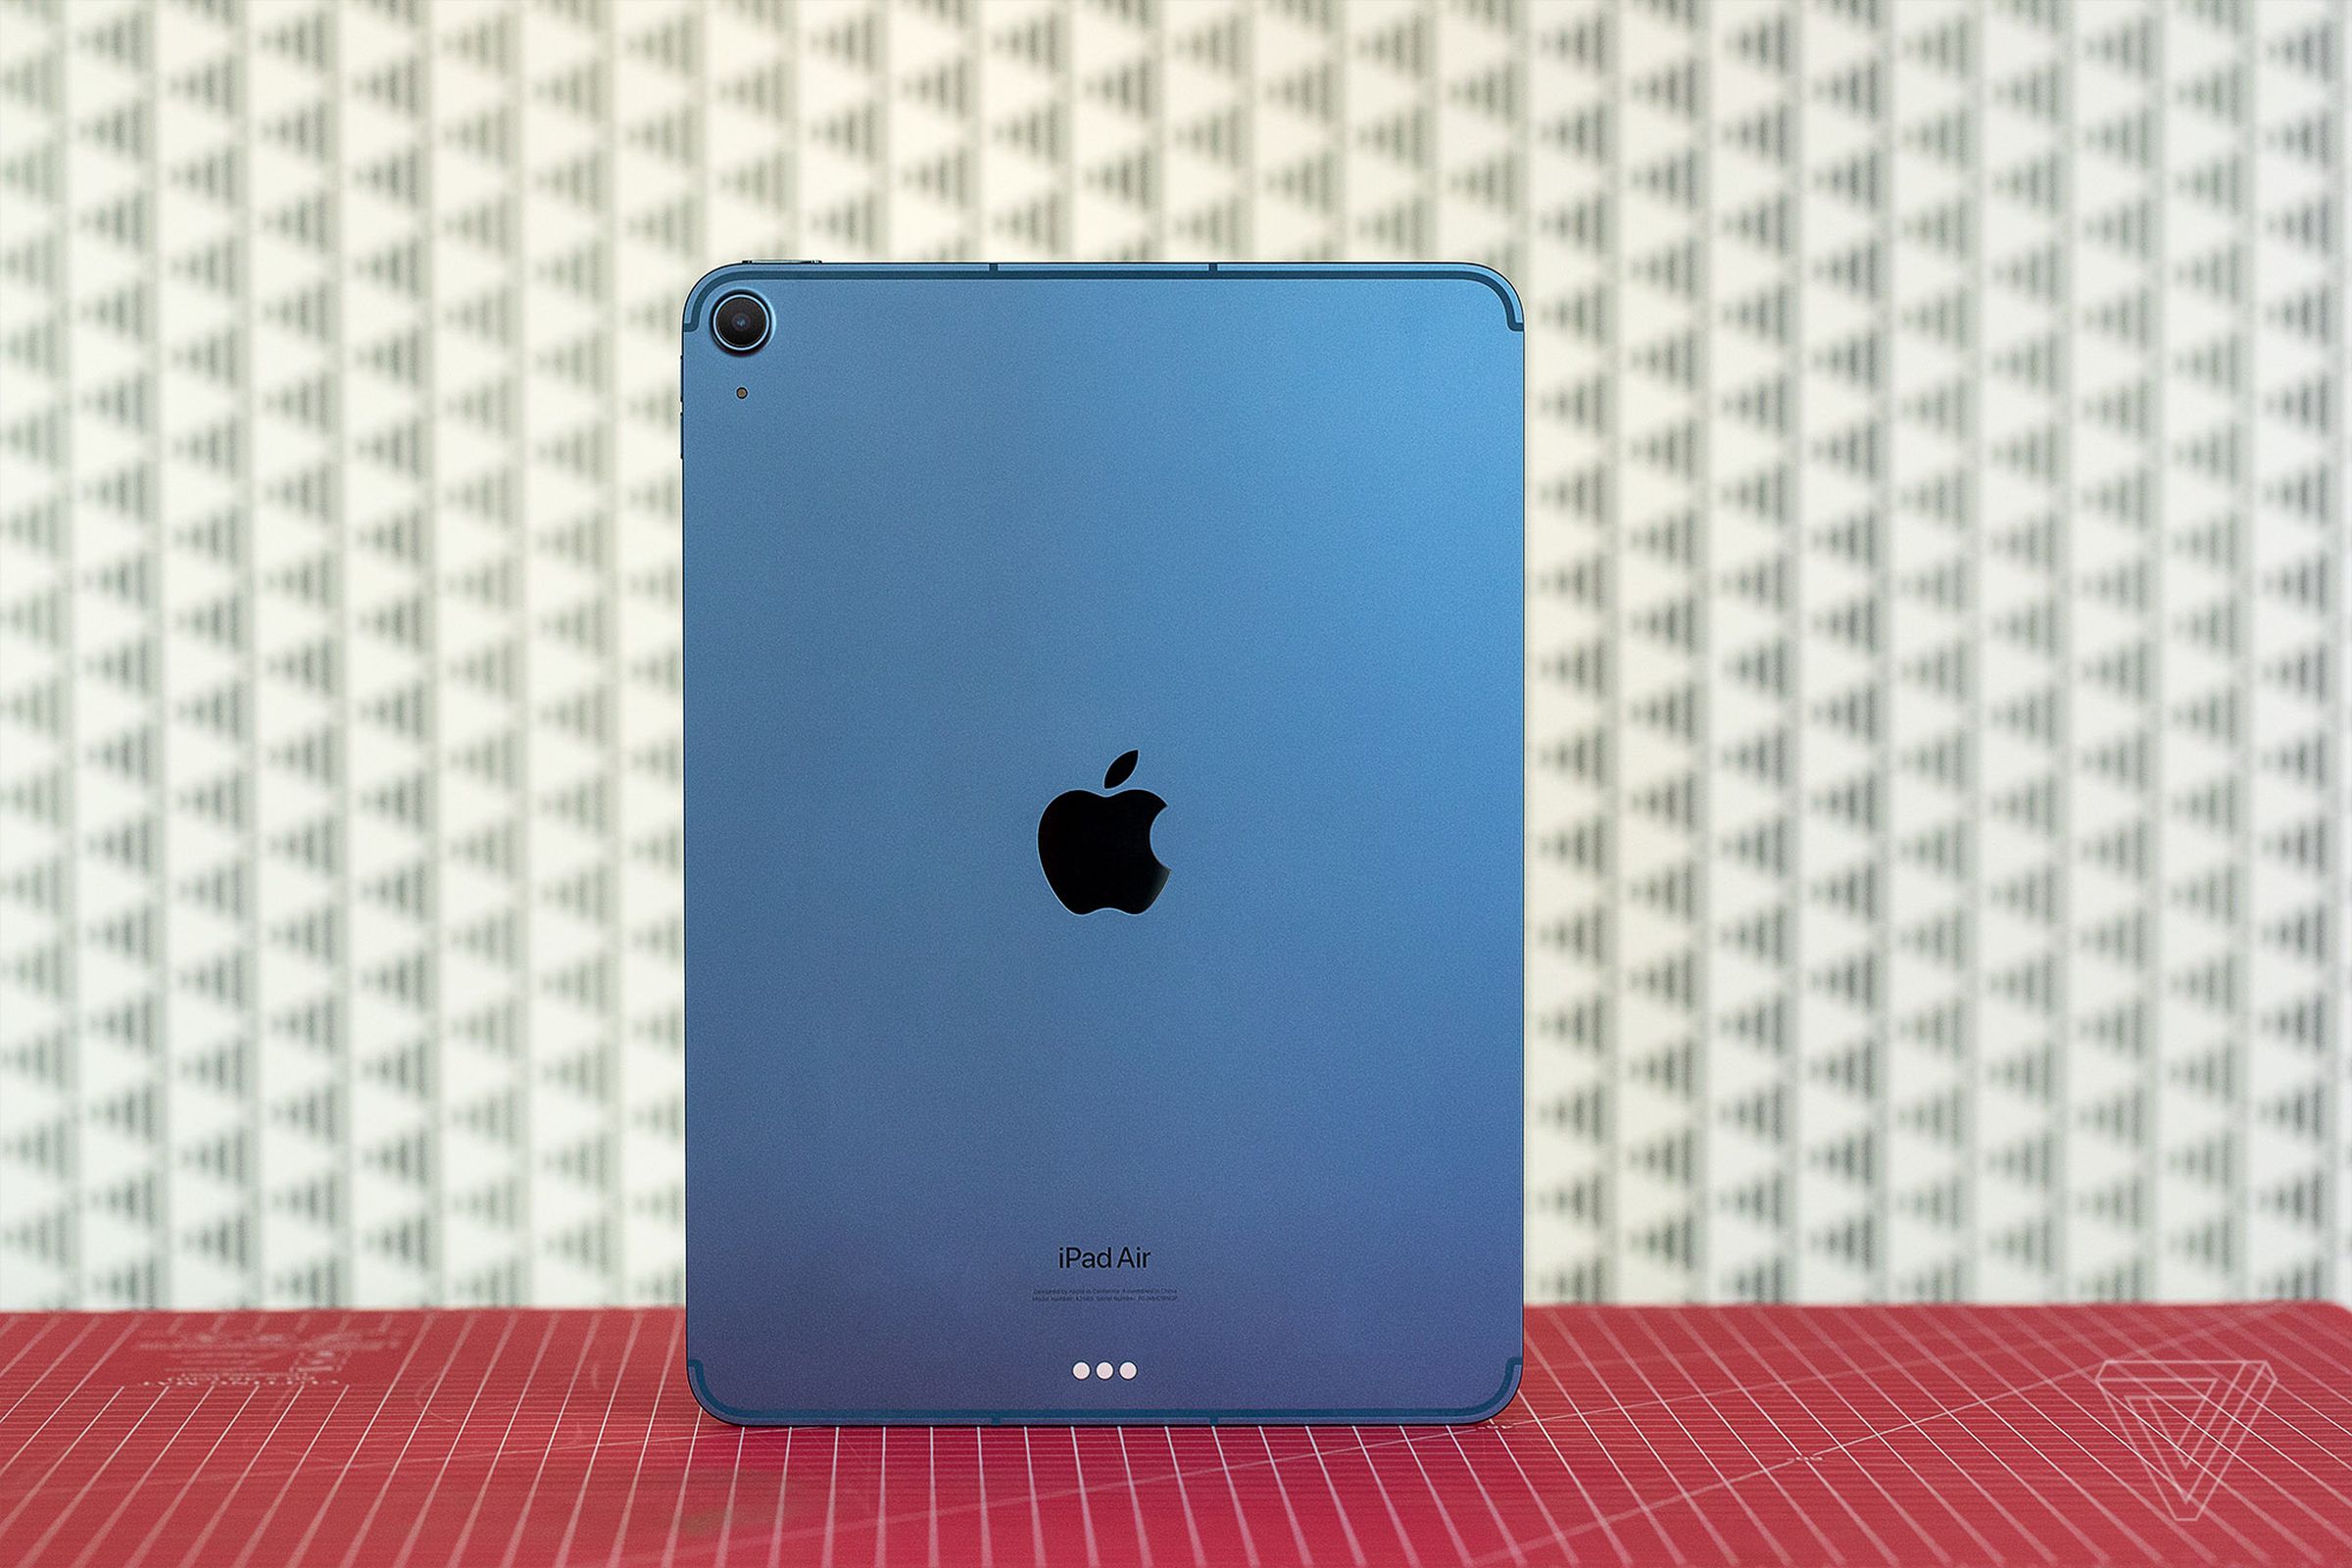 The rear of the 2022 iPad Air, in blue, standing in front of a patterned background.